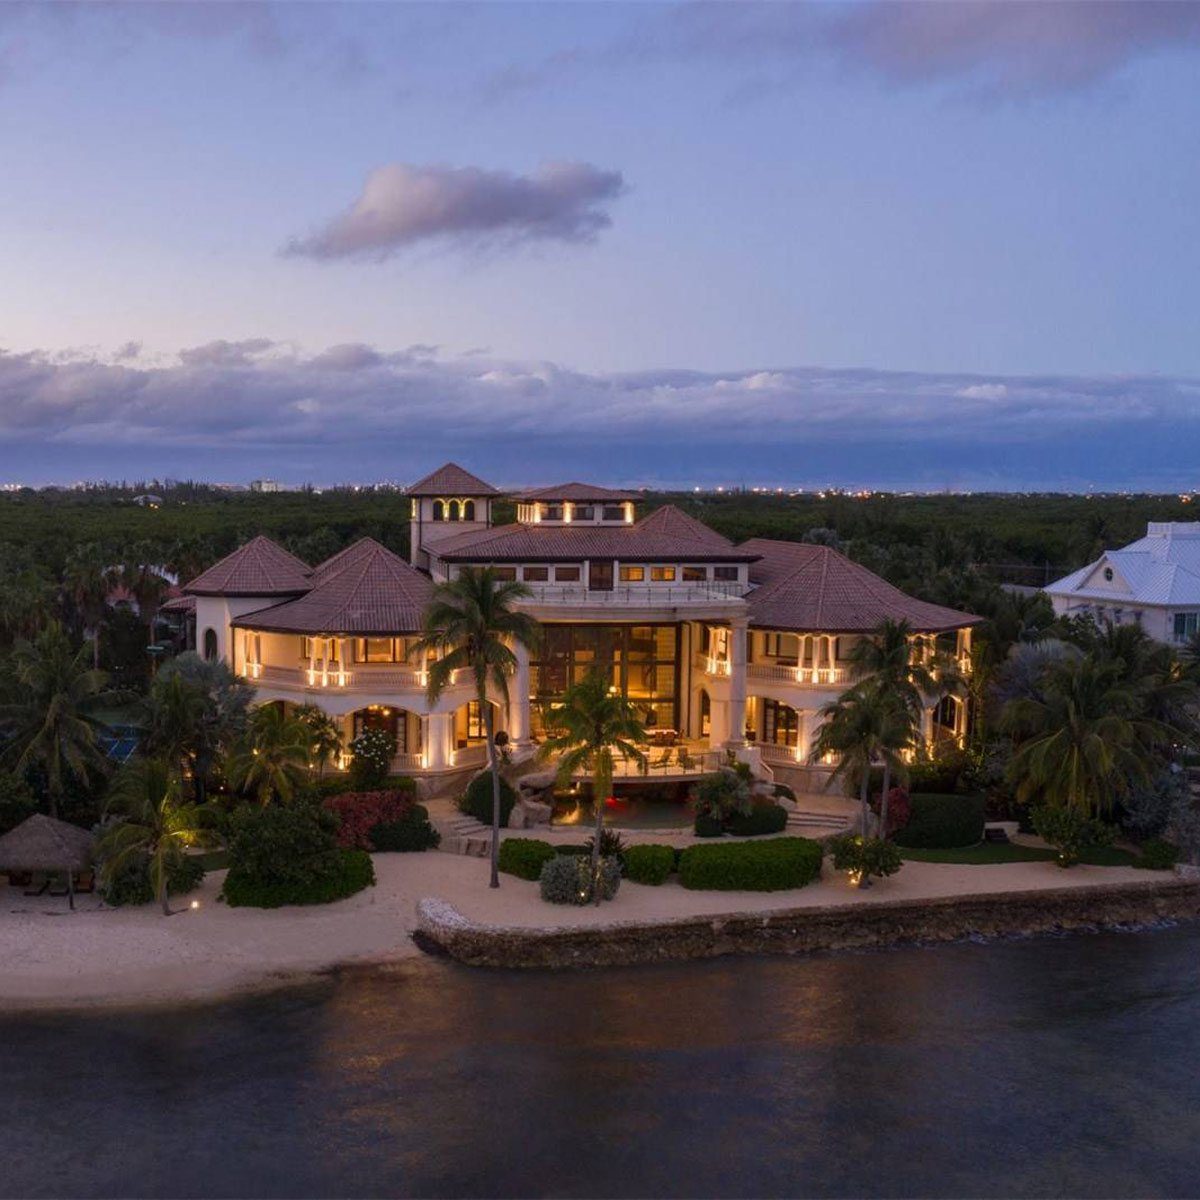 Large mansion with big beach